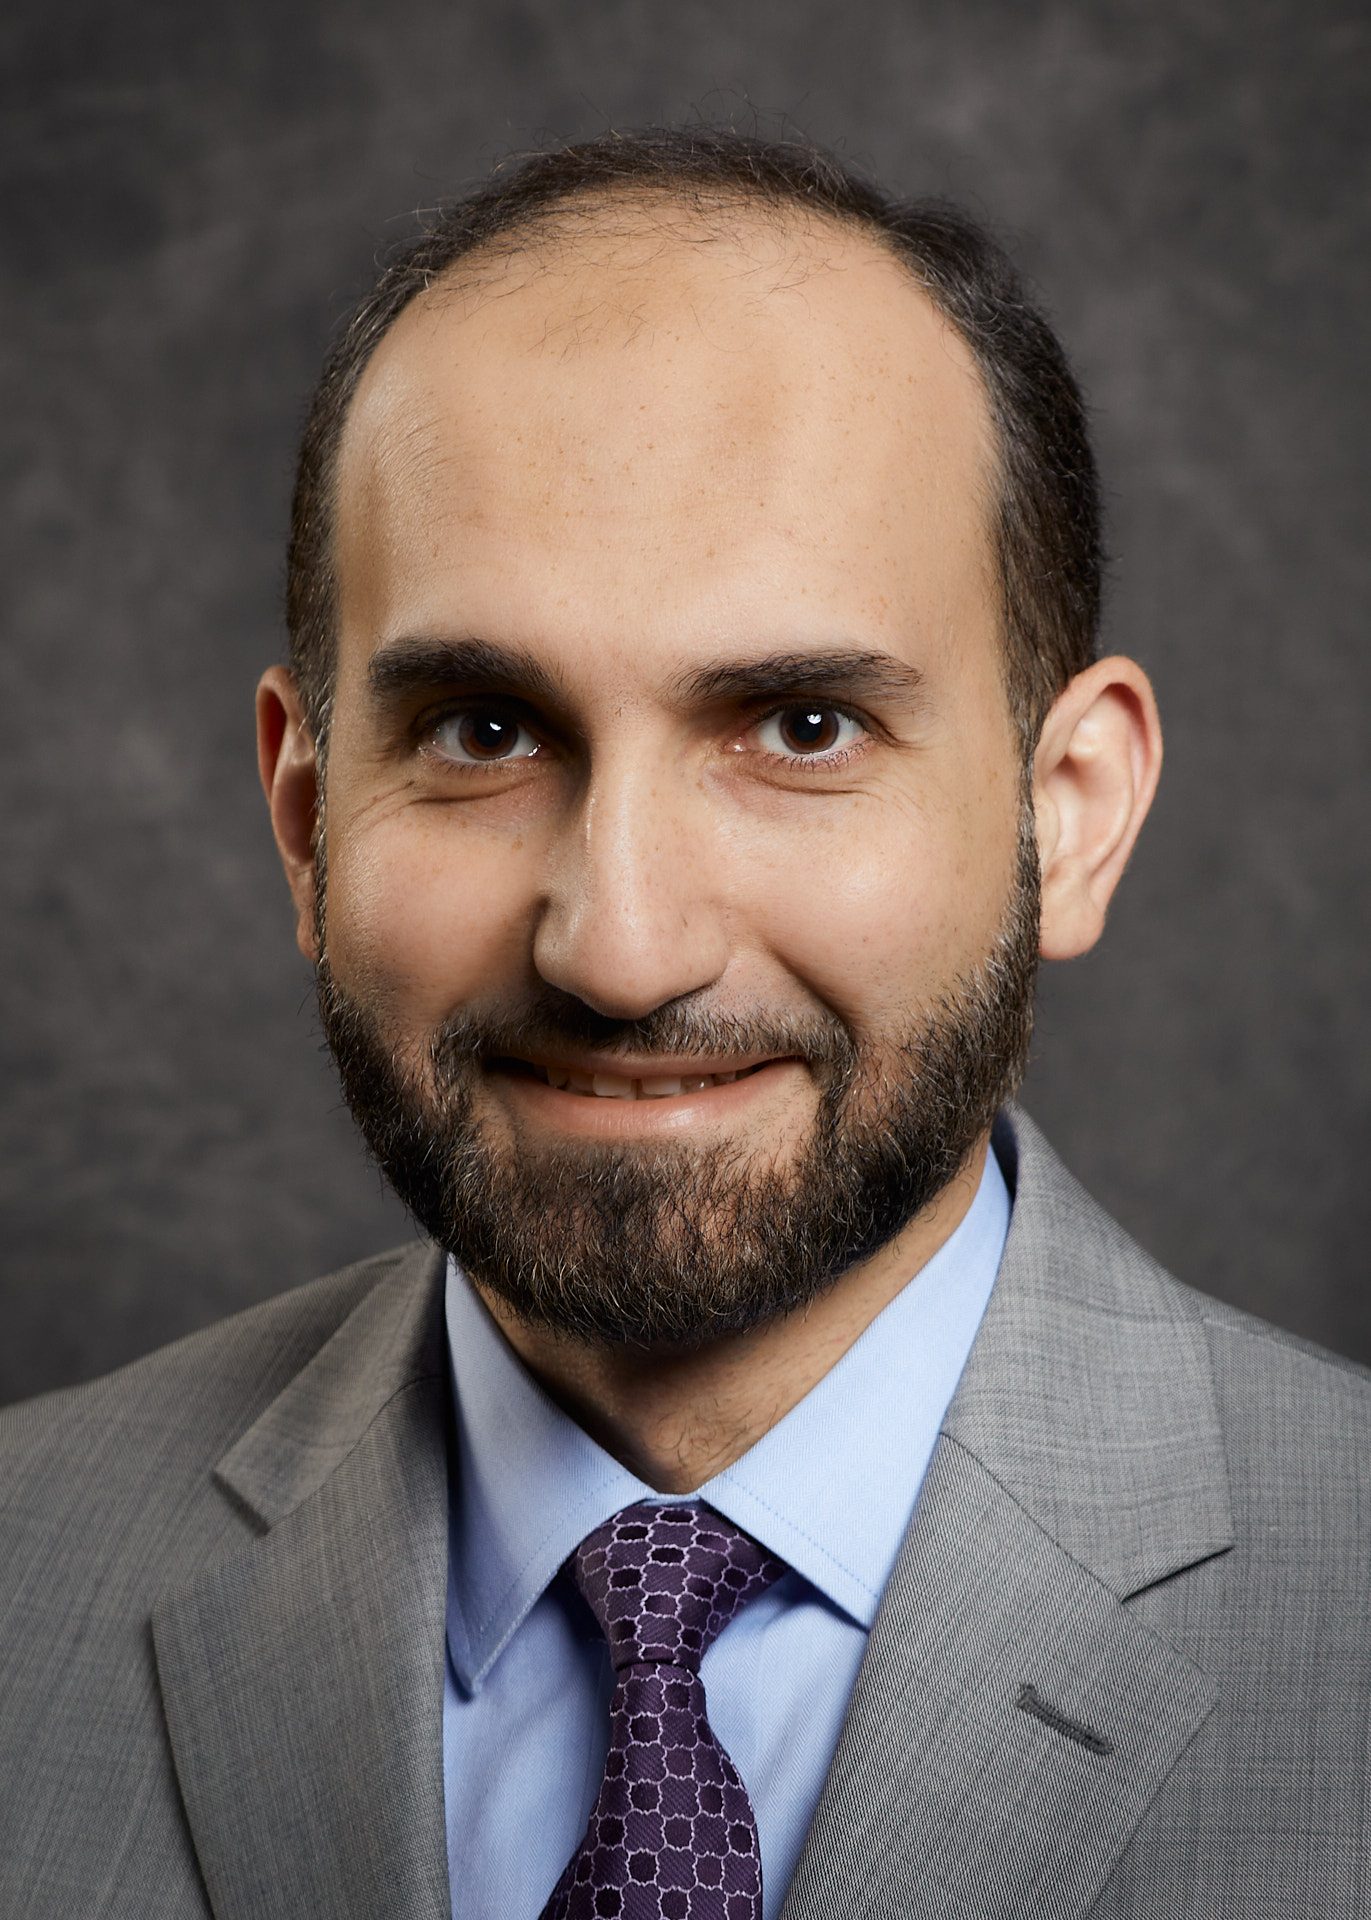 Anas Alsara, MD - An Employed Provider of Memorial Healthcare